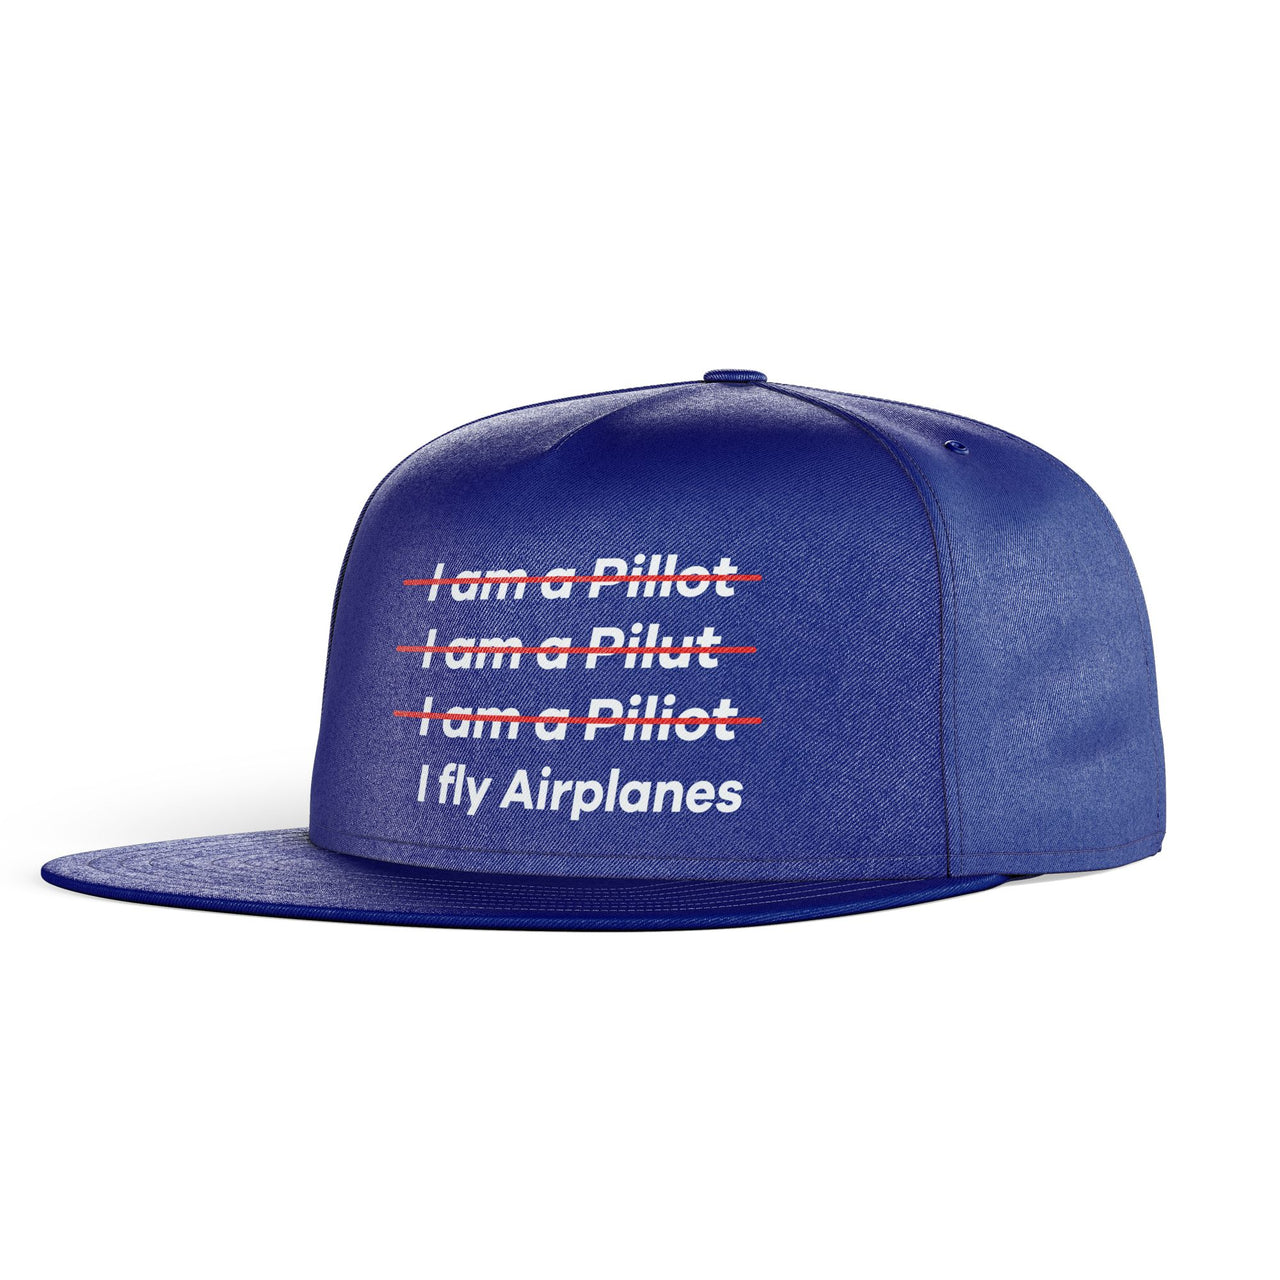 I Fly Airplanes Designed Snapback Caps & Hats